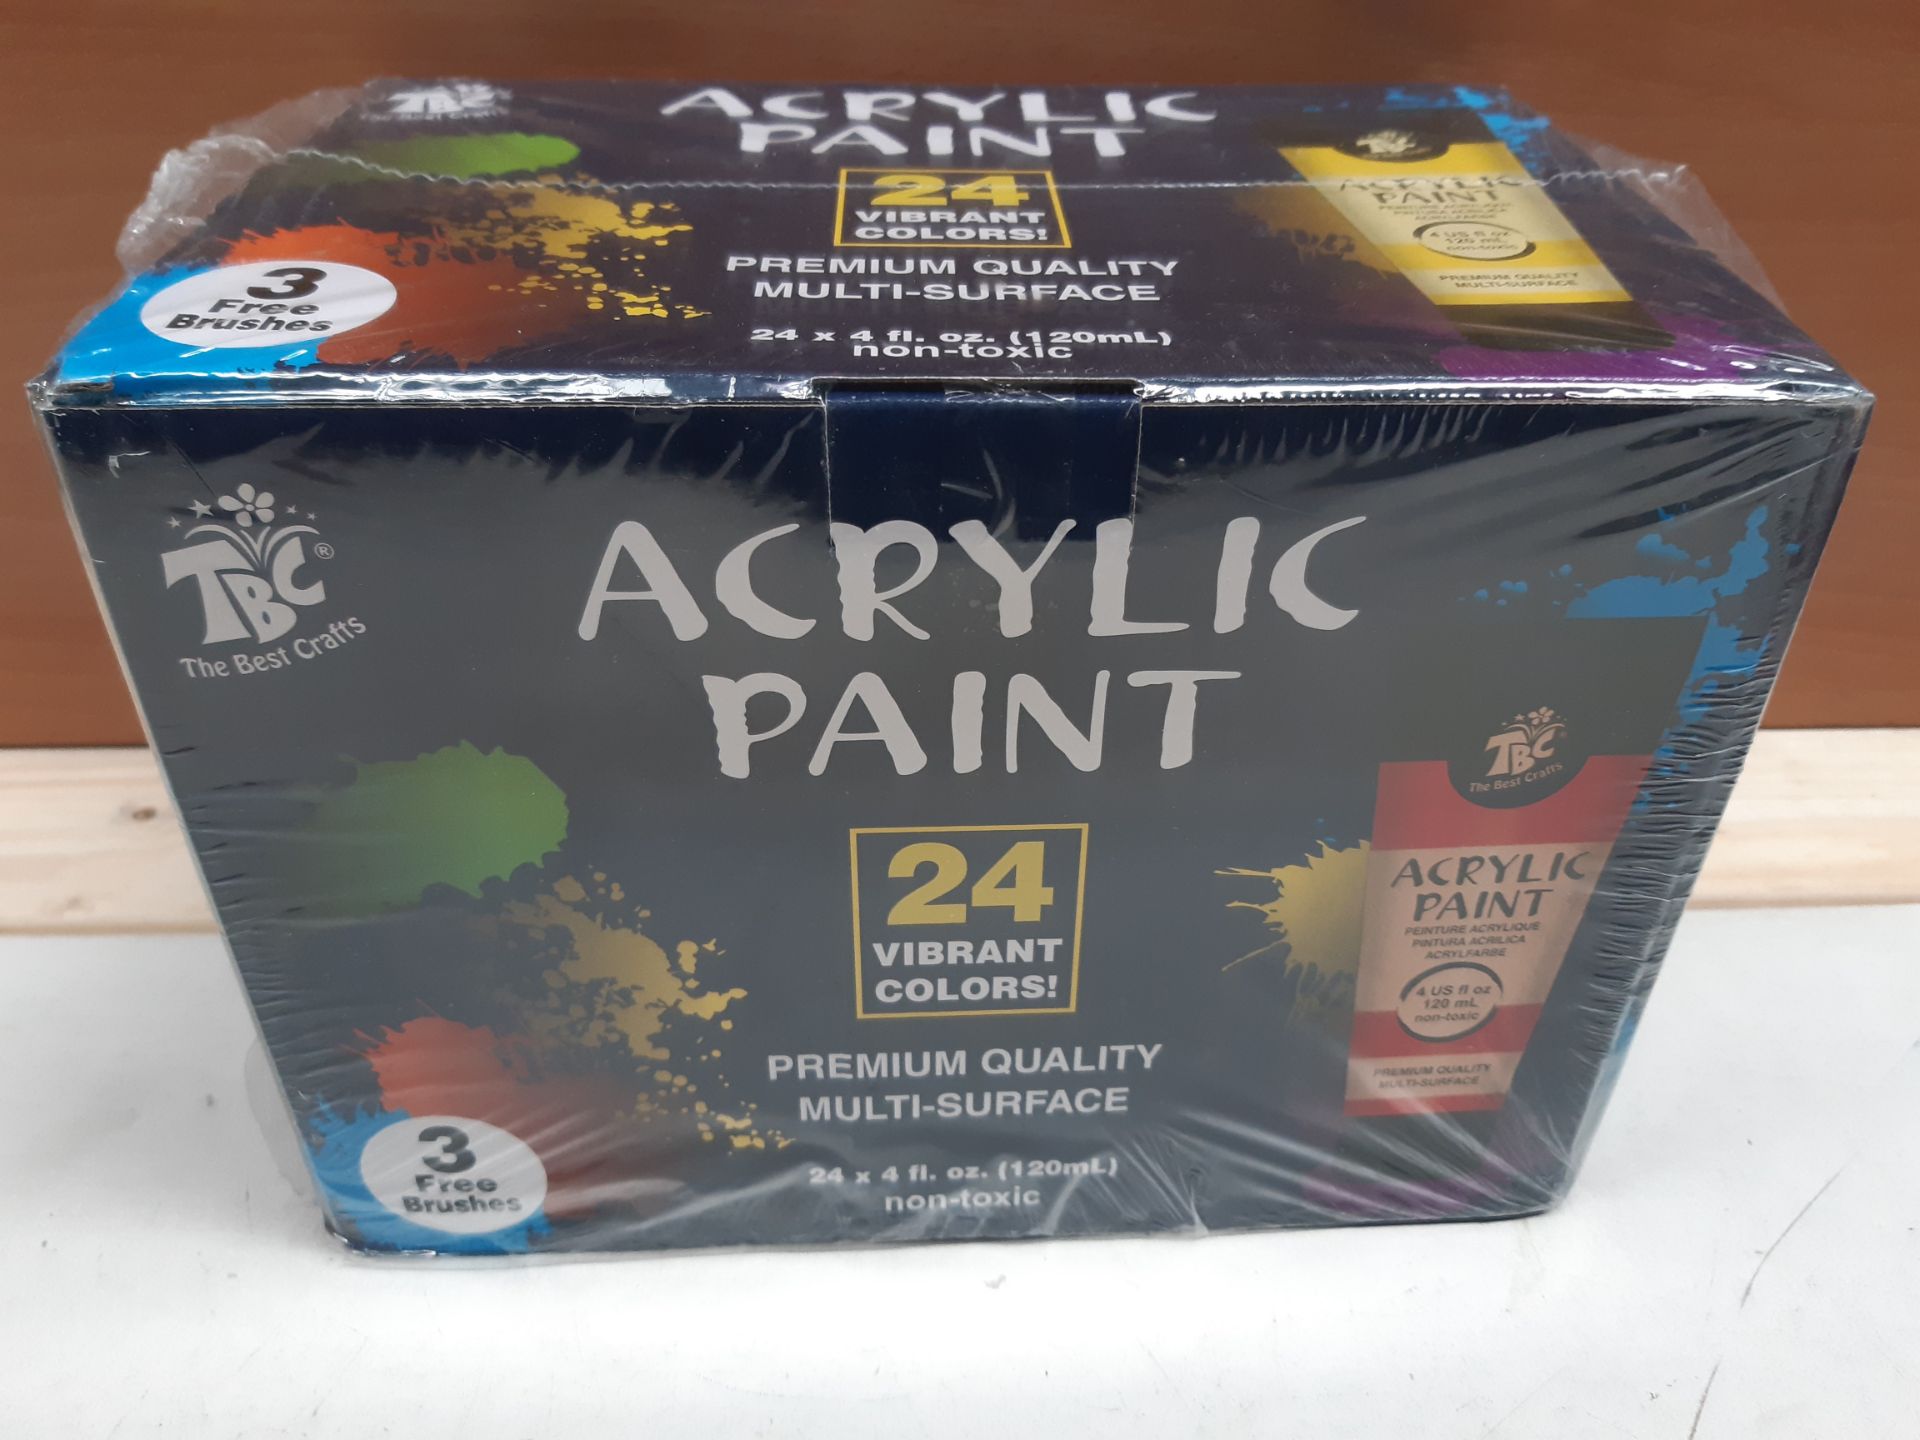 RRP £29.99 TBC The Best Crafts Acrylic Paint - Image 2 of 2